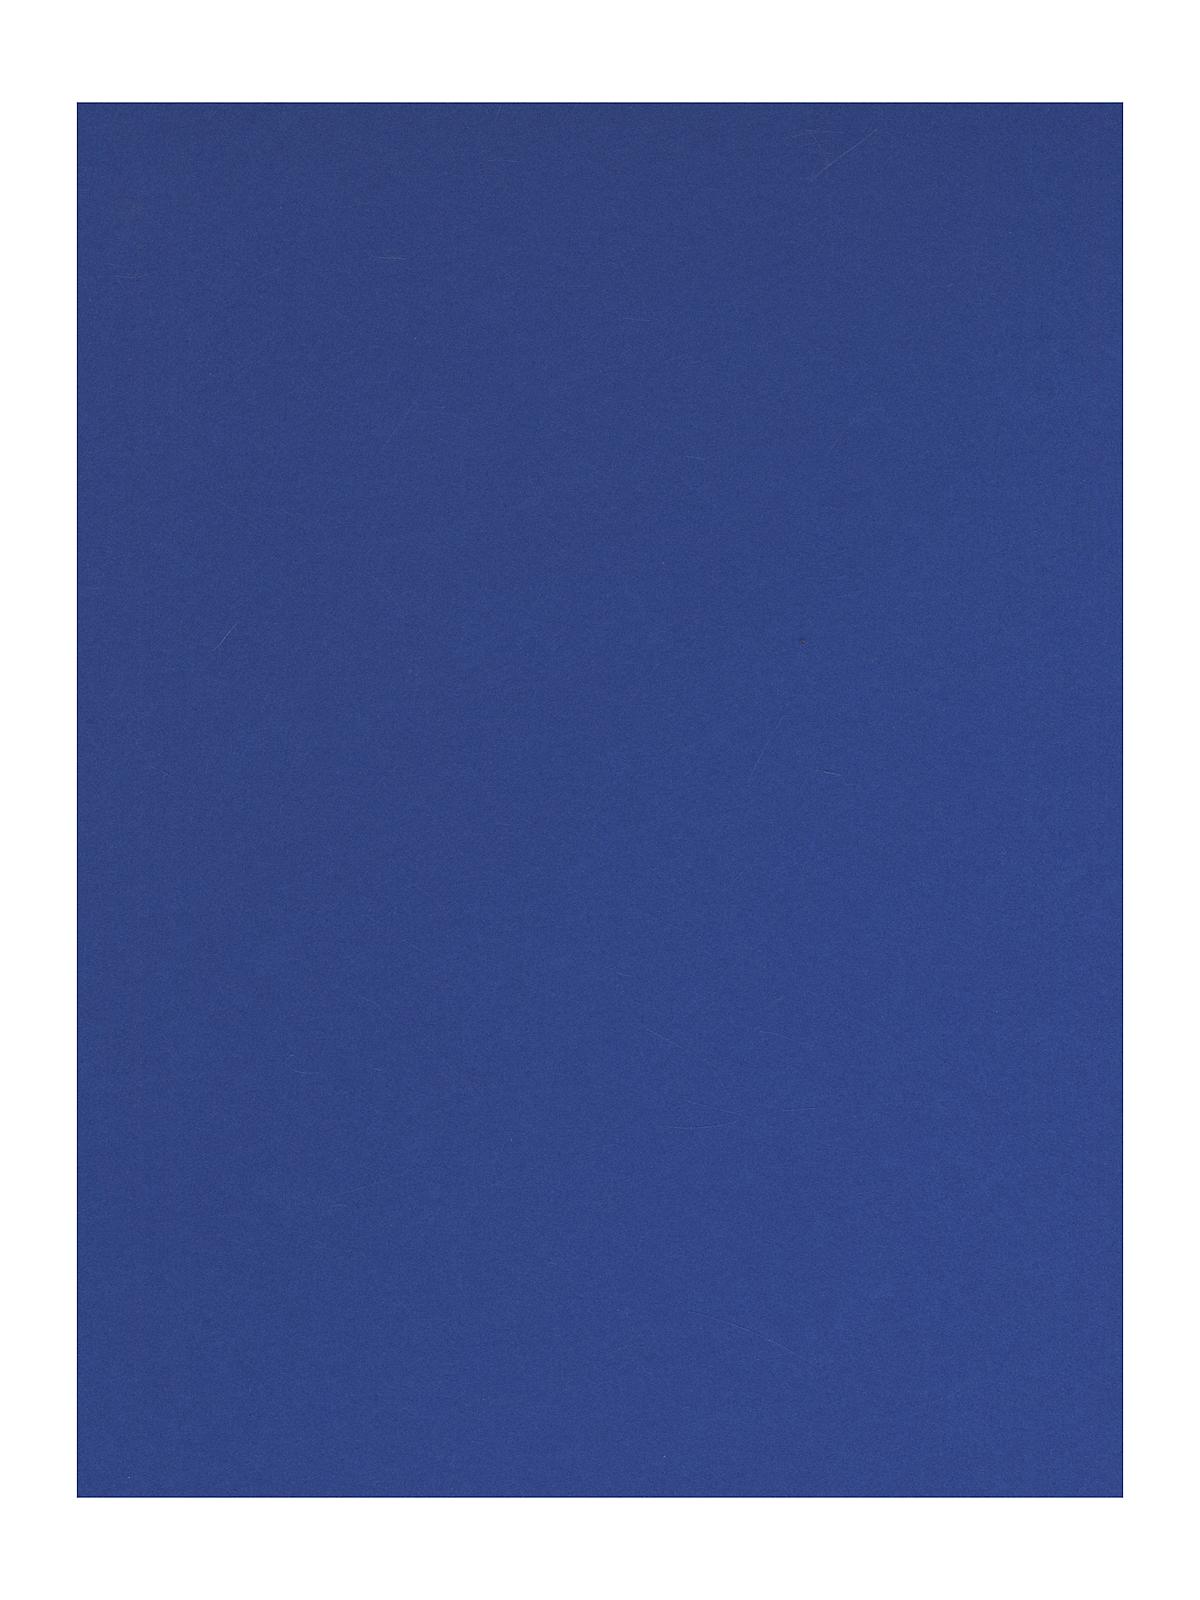 Colorline Heavyweight Paper Sheets Royal Blue 300 Gsm 19 In. X 25 In.